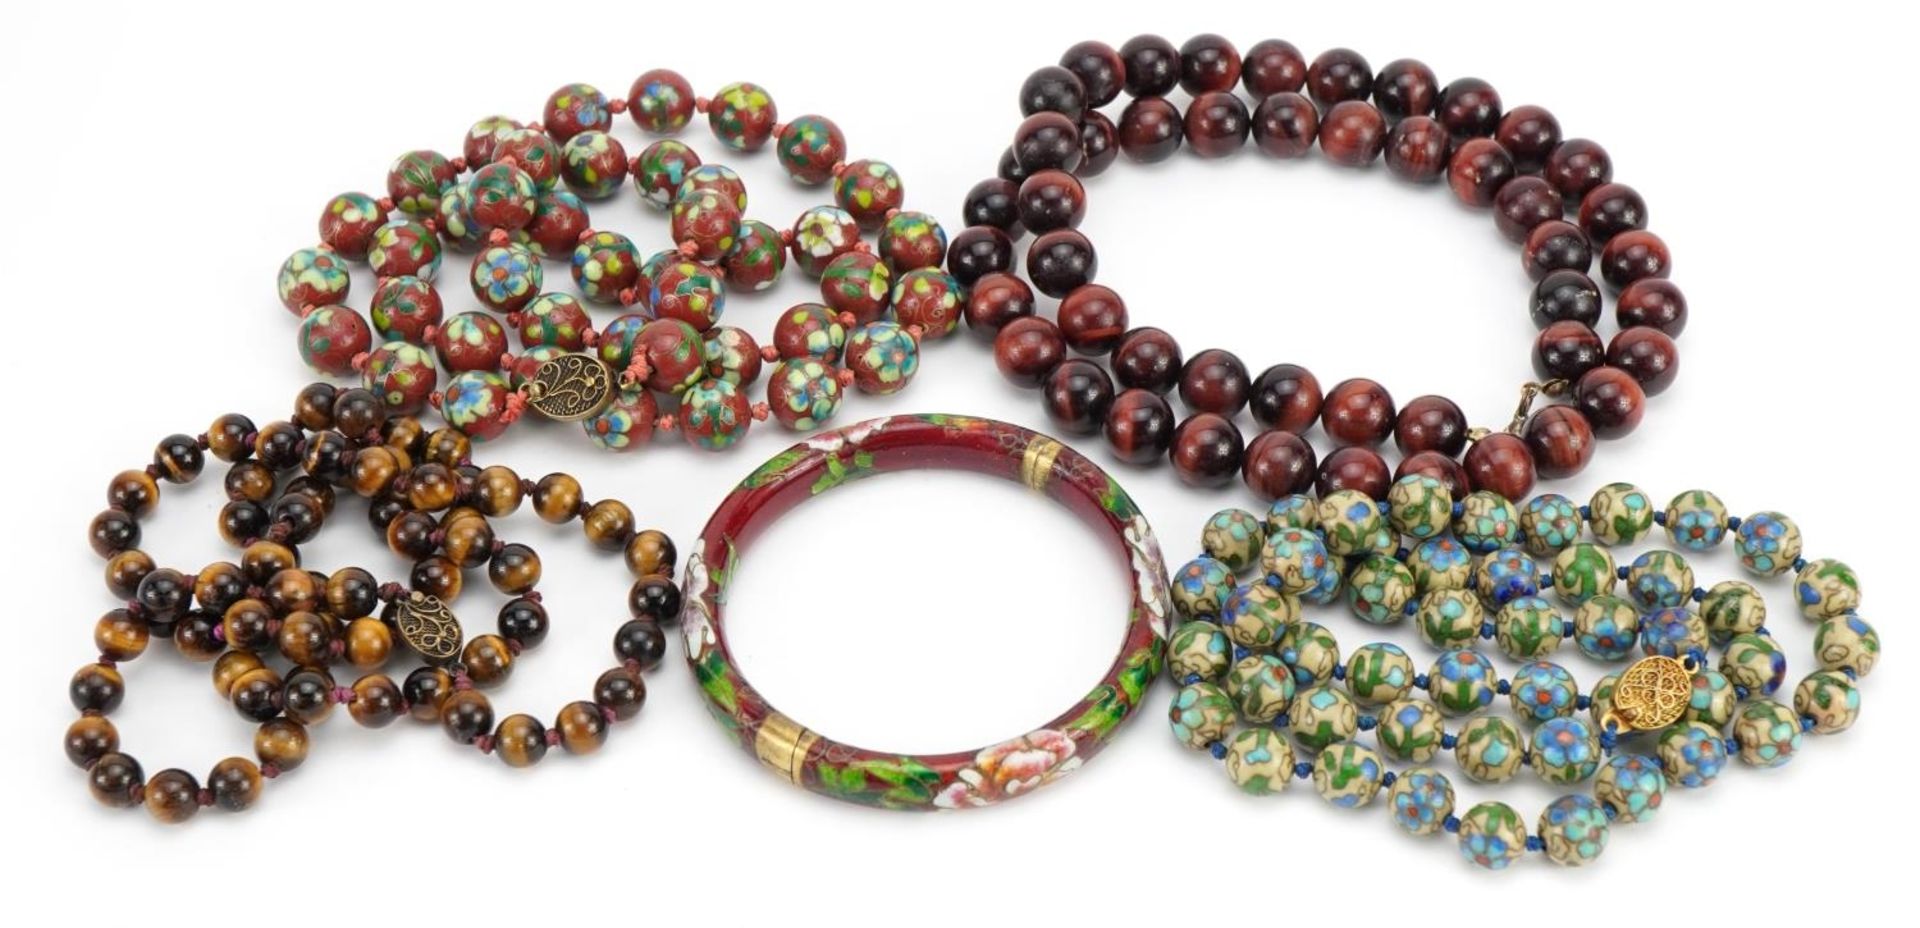 Two Chinese cloisonne bead necklaces, two tiger's eye bead necklaces and a cloisonne bangle